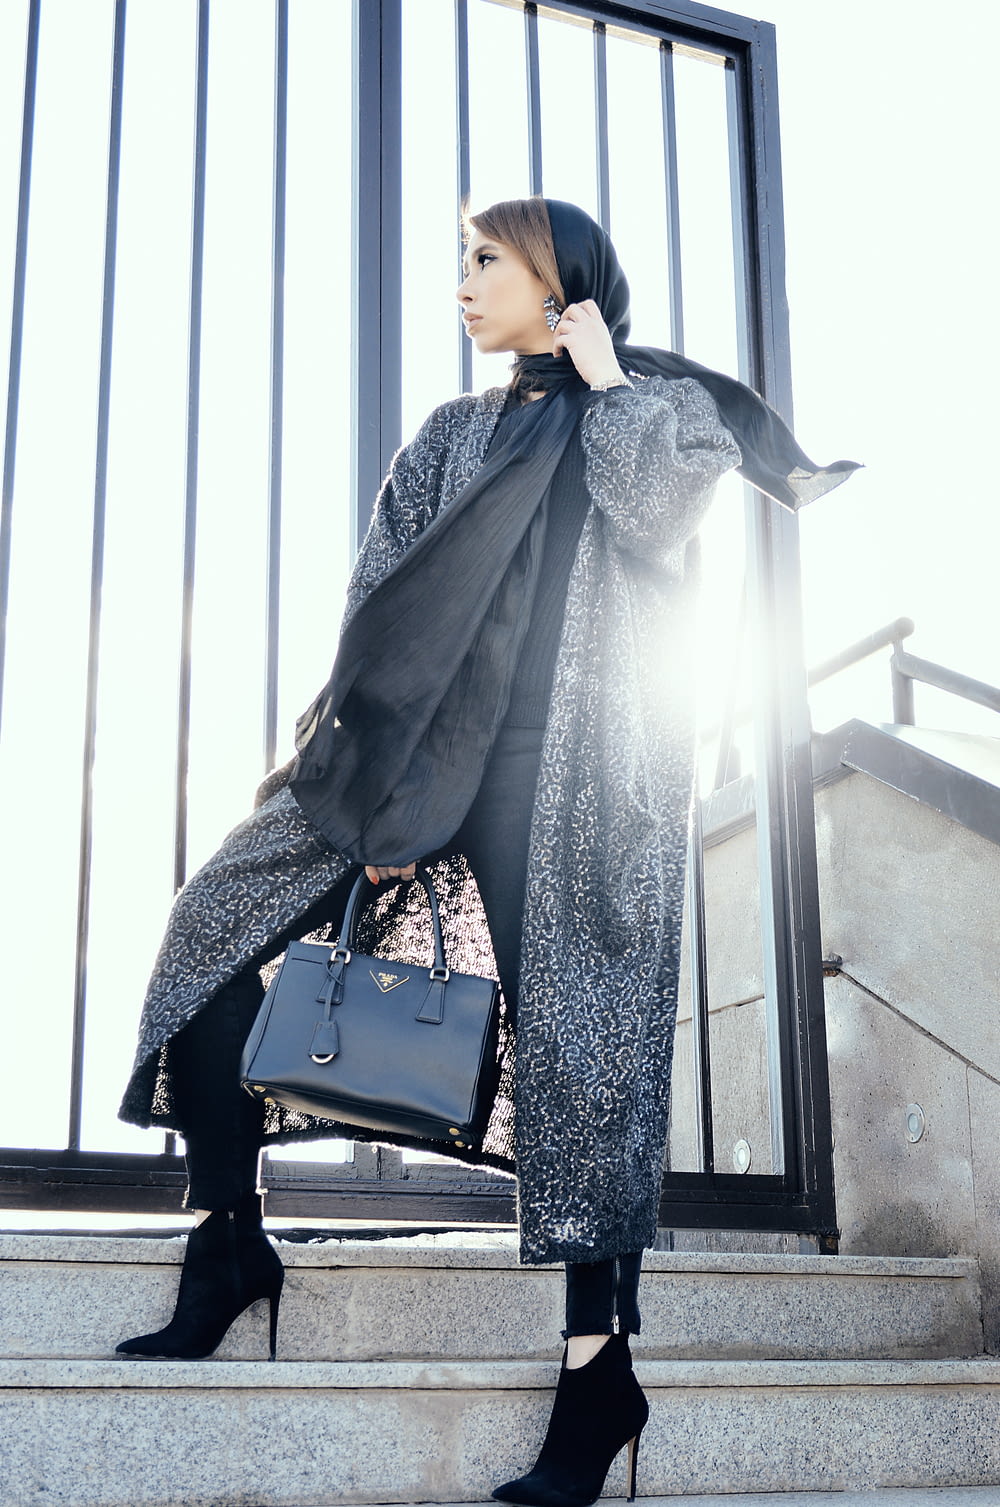 woman in gray coat holding black handbag standing on gray stairs during daytime